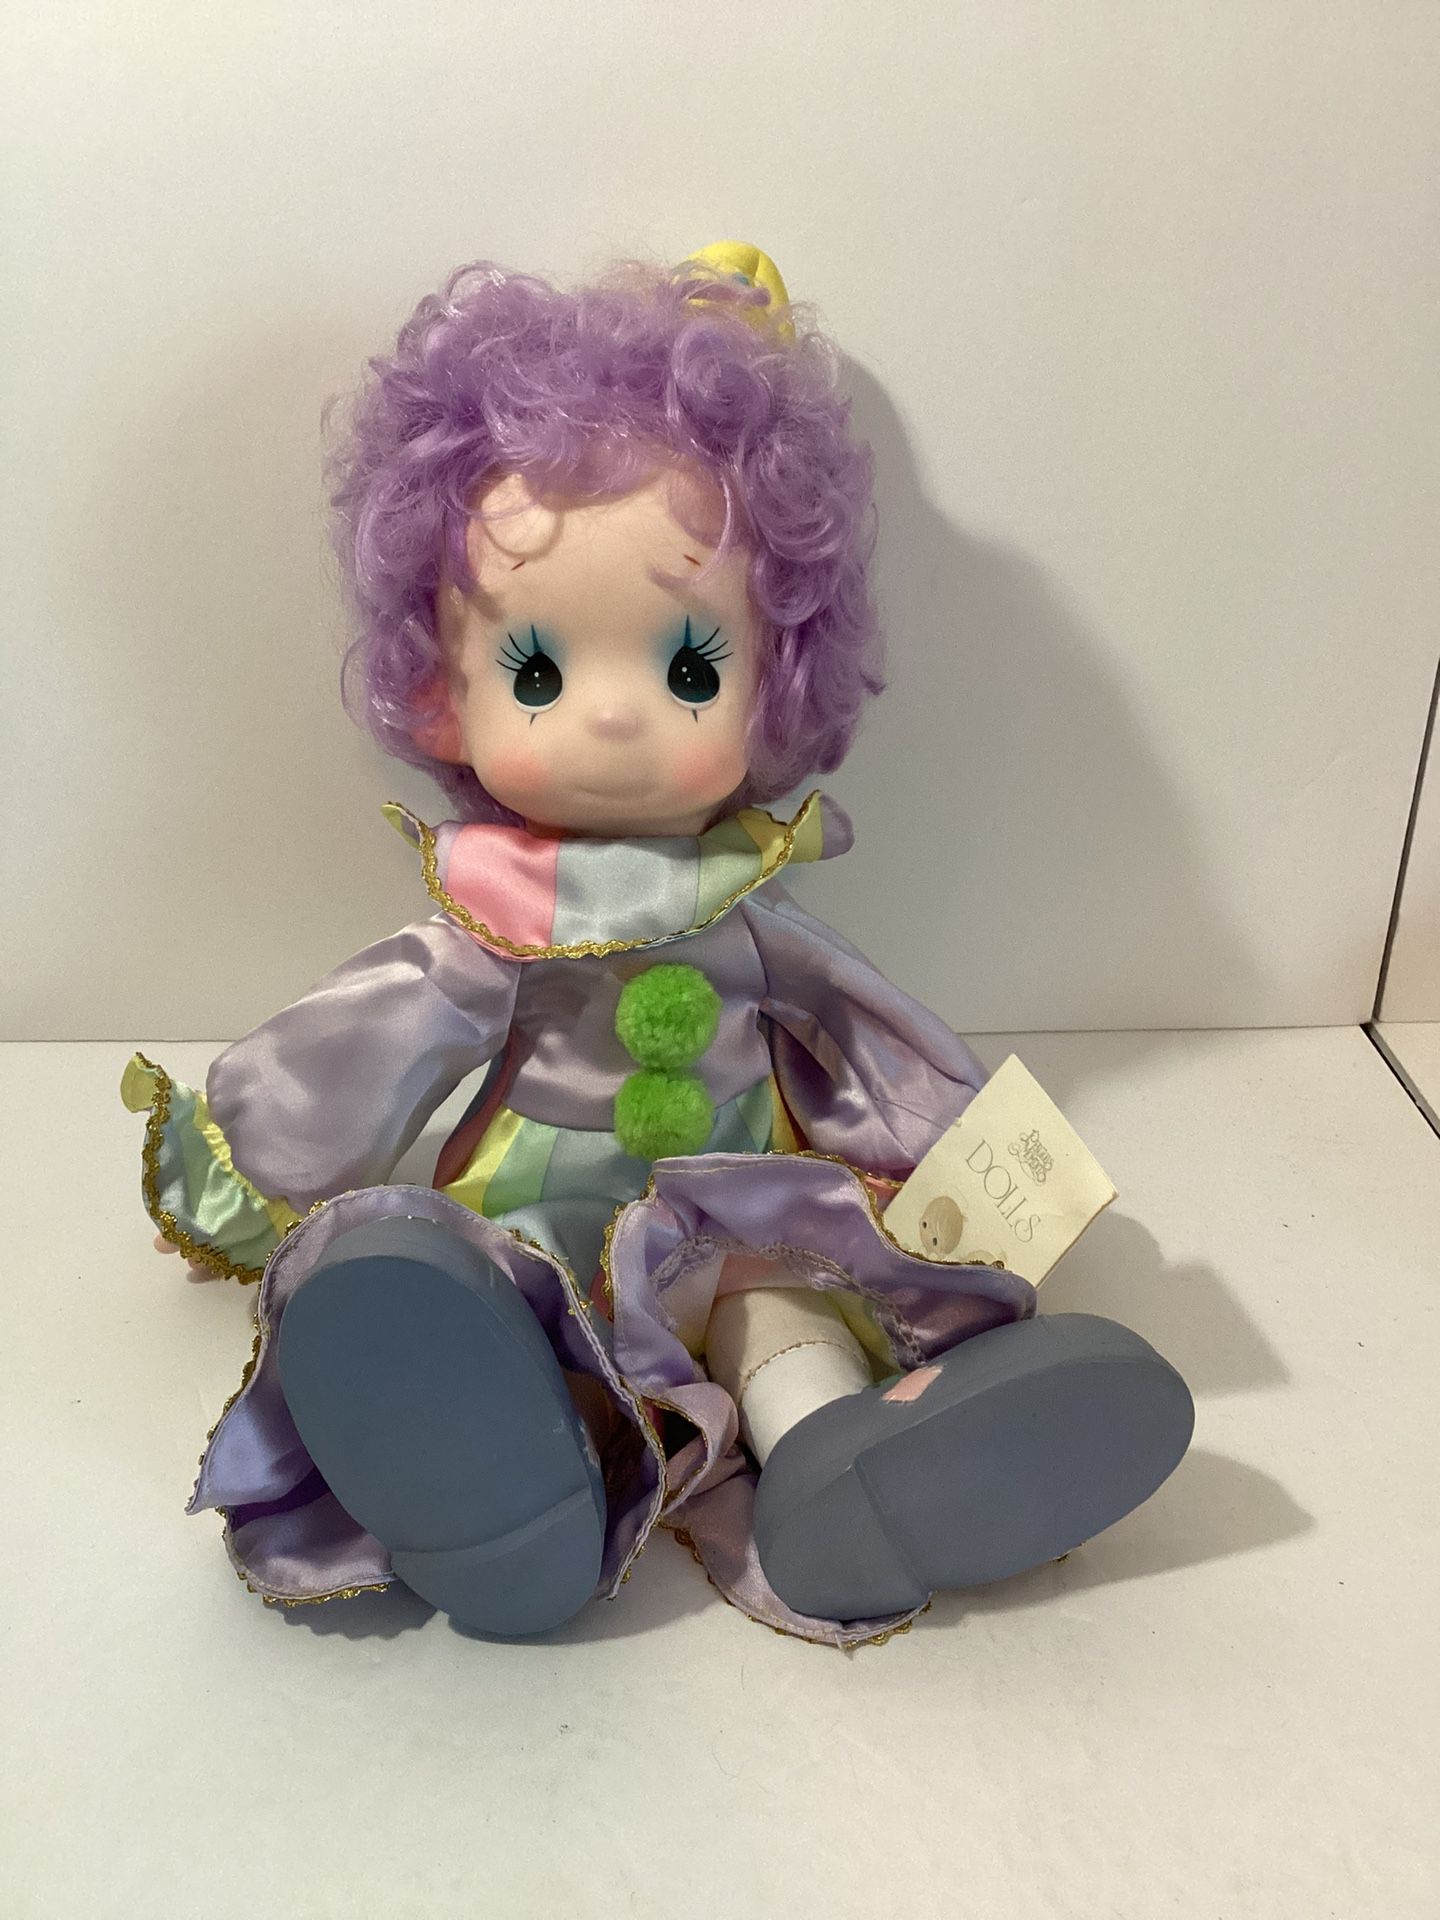  Vintage 1986 Precious Moments TotoClown Doll